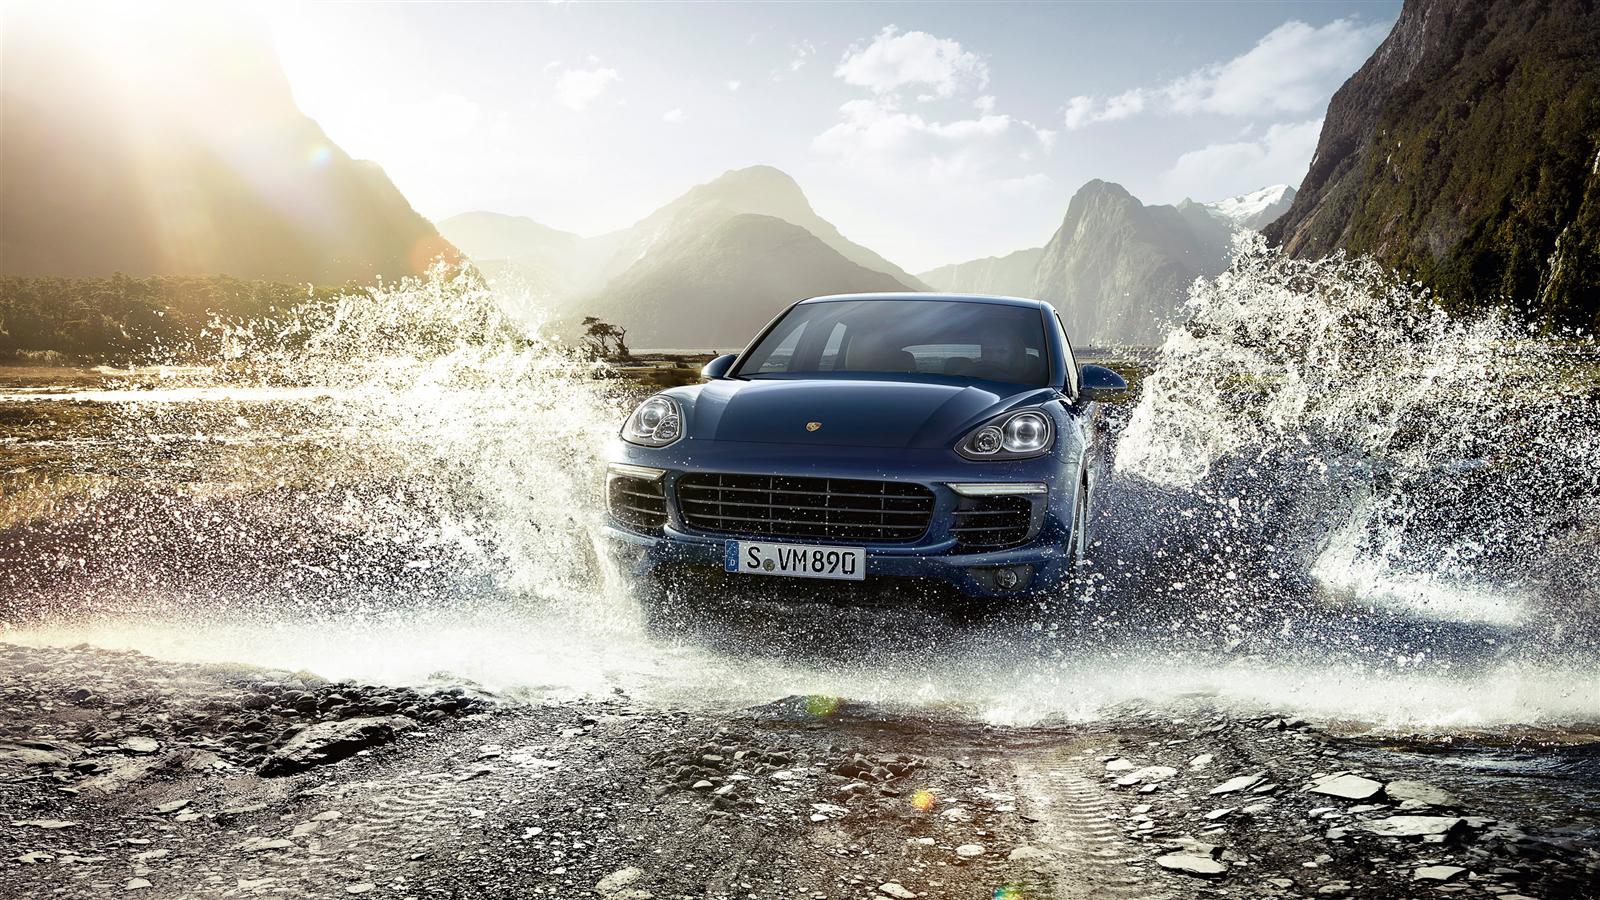 2015 Porsche Cayenne Facelift Launched in India at Rs. 1.02 Crores (ex-showroom, Maharashtra)